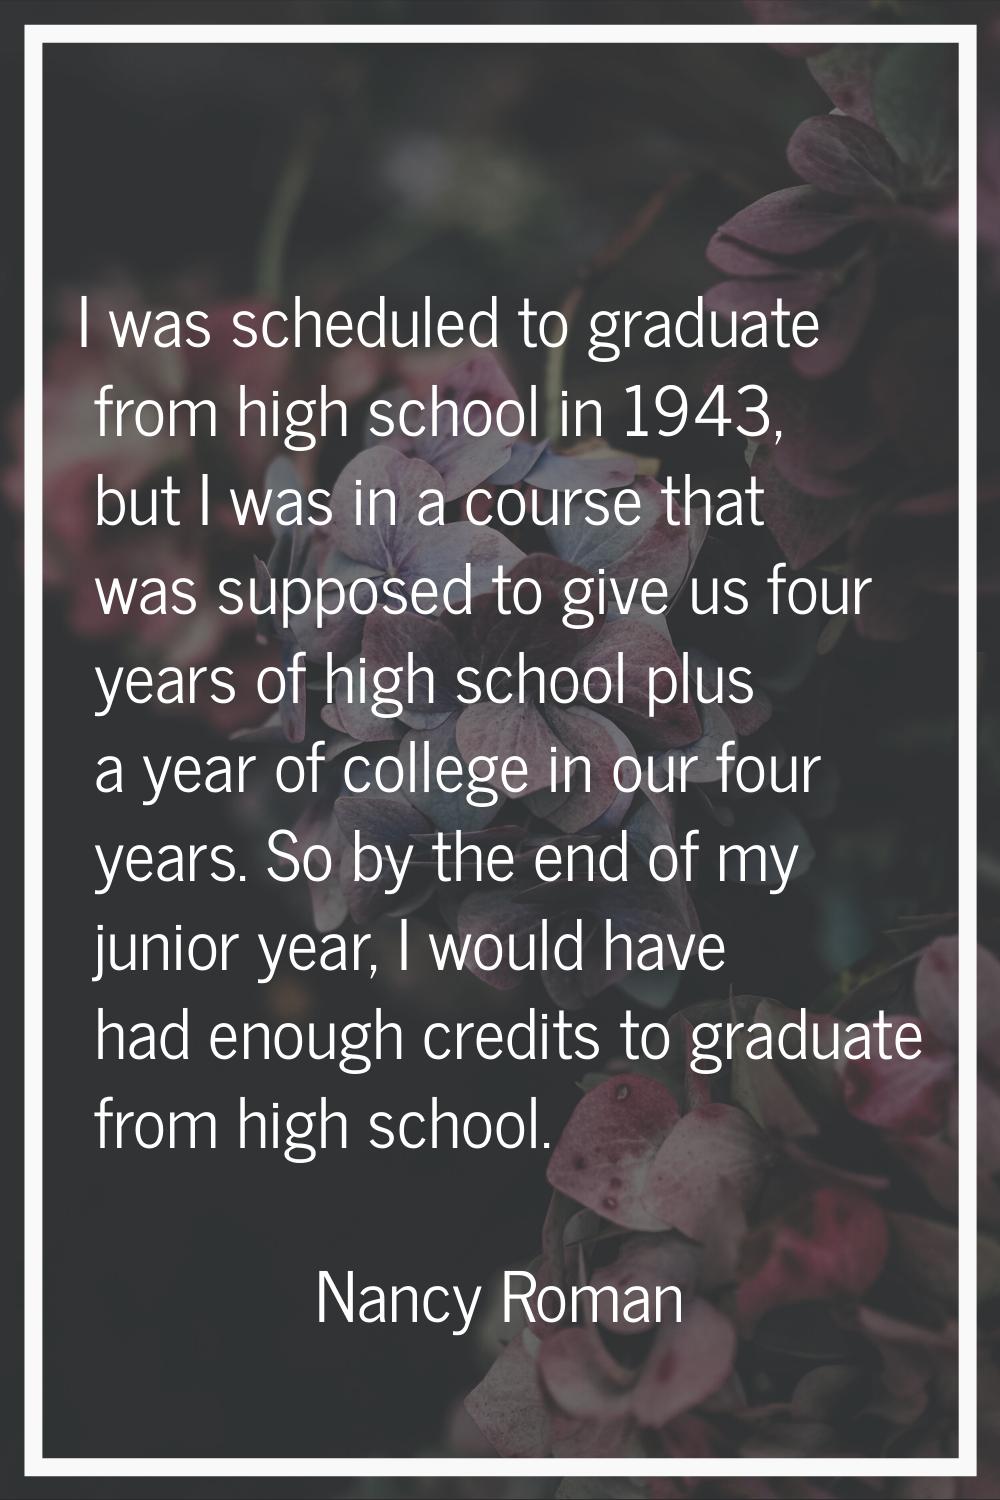 I was scheduled to graduate from high school in 1943, but I was in a course that was supposed to gi